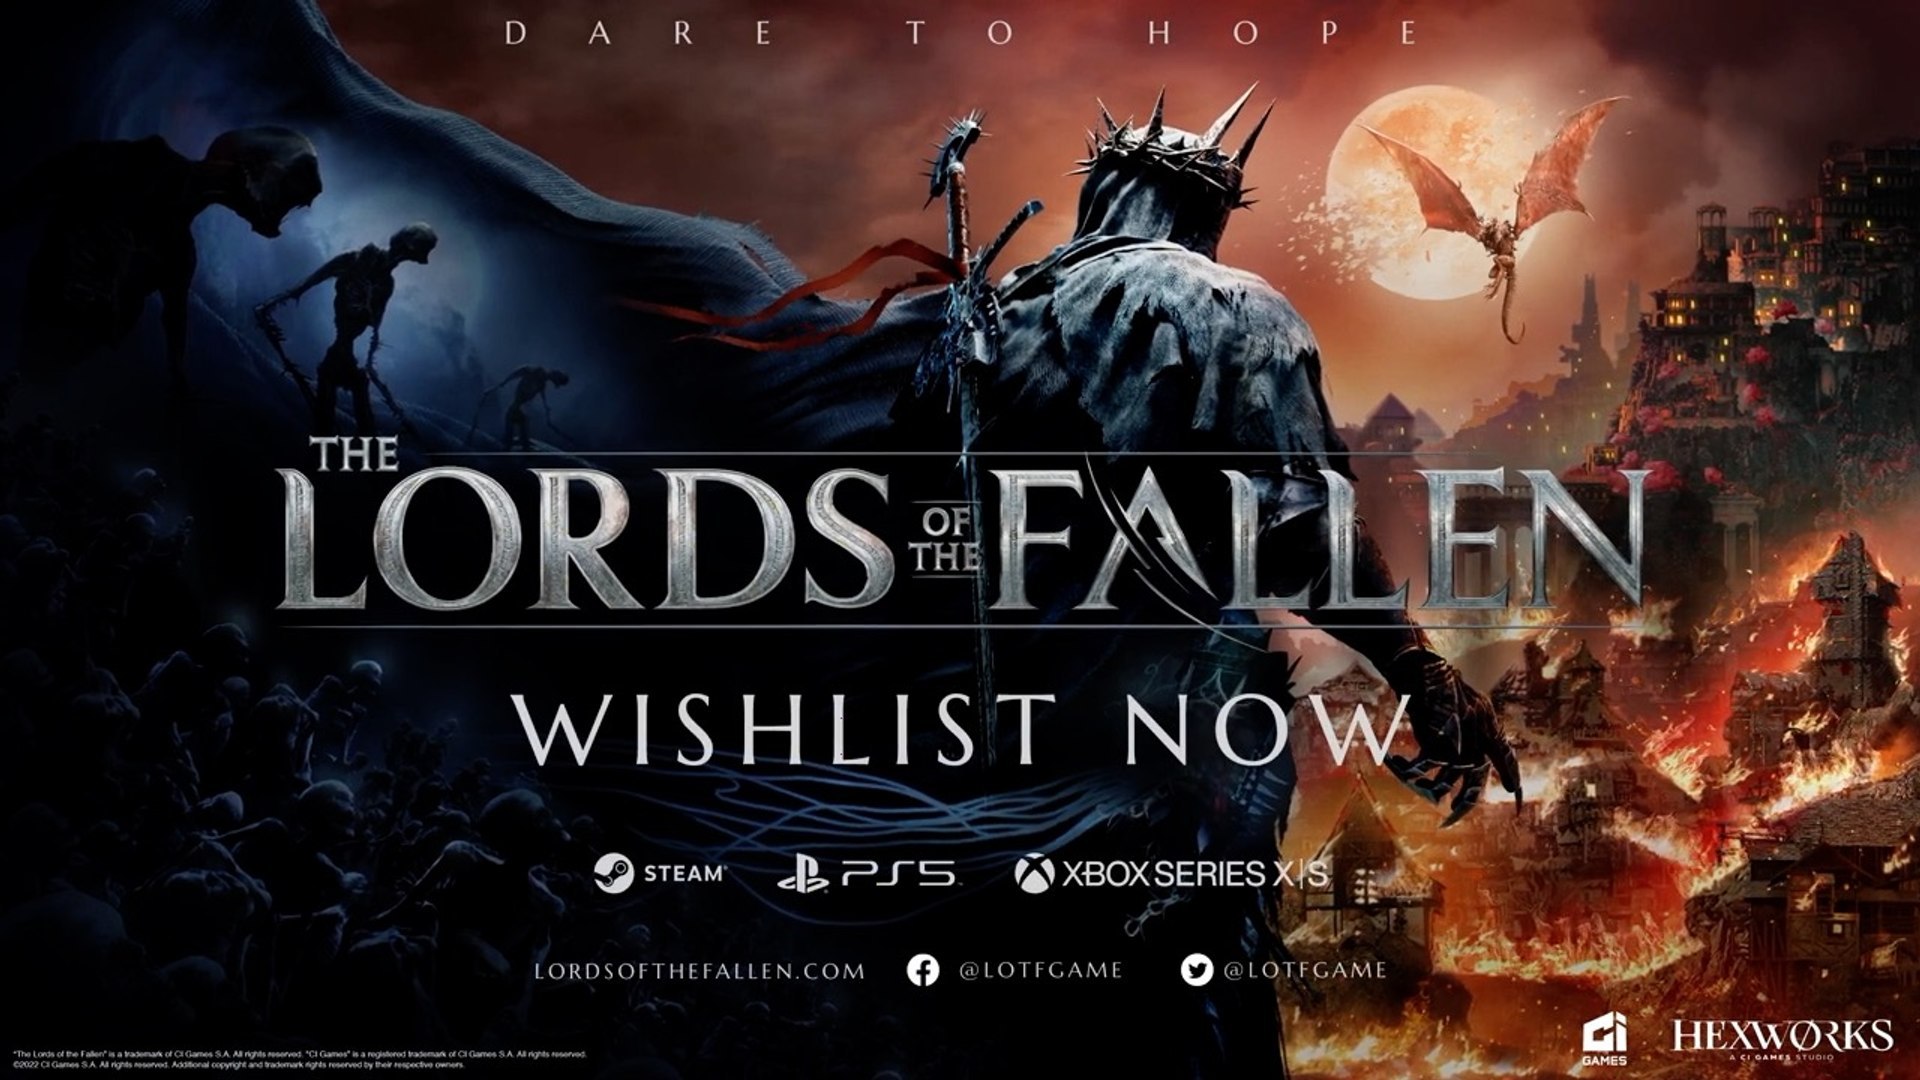 LORDS OF THE FALLEN - 'Dual Worlds' Gameplay Showcase